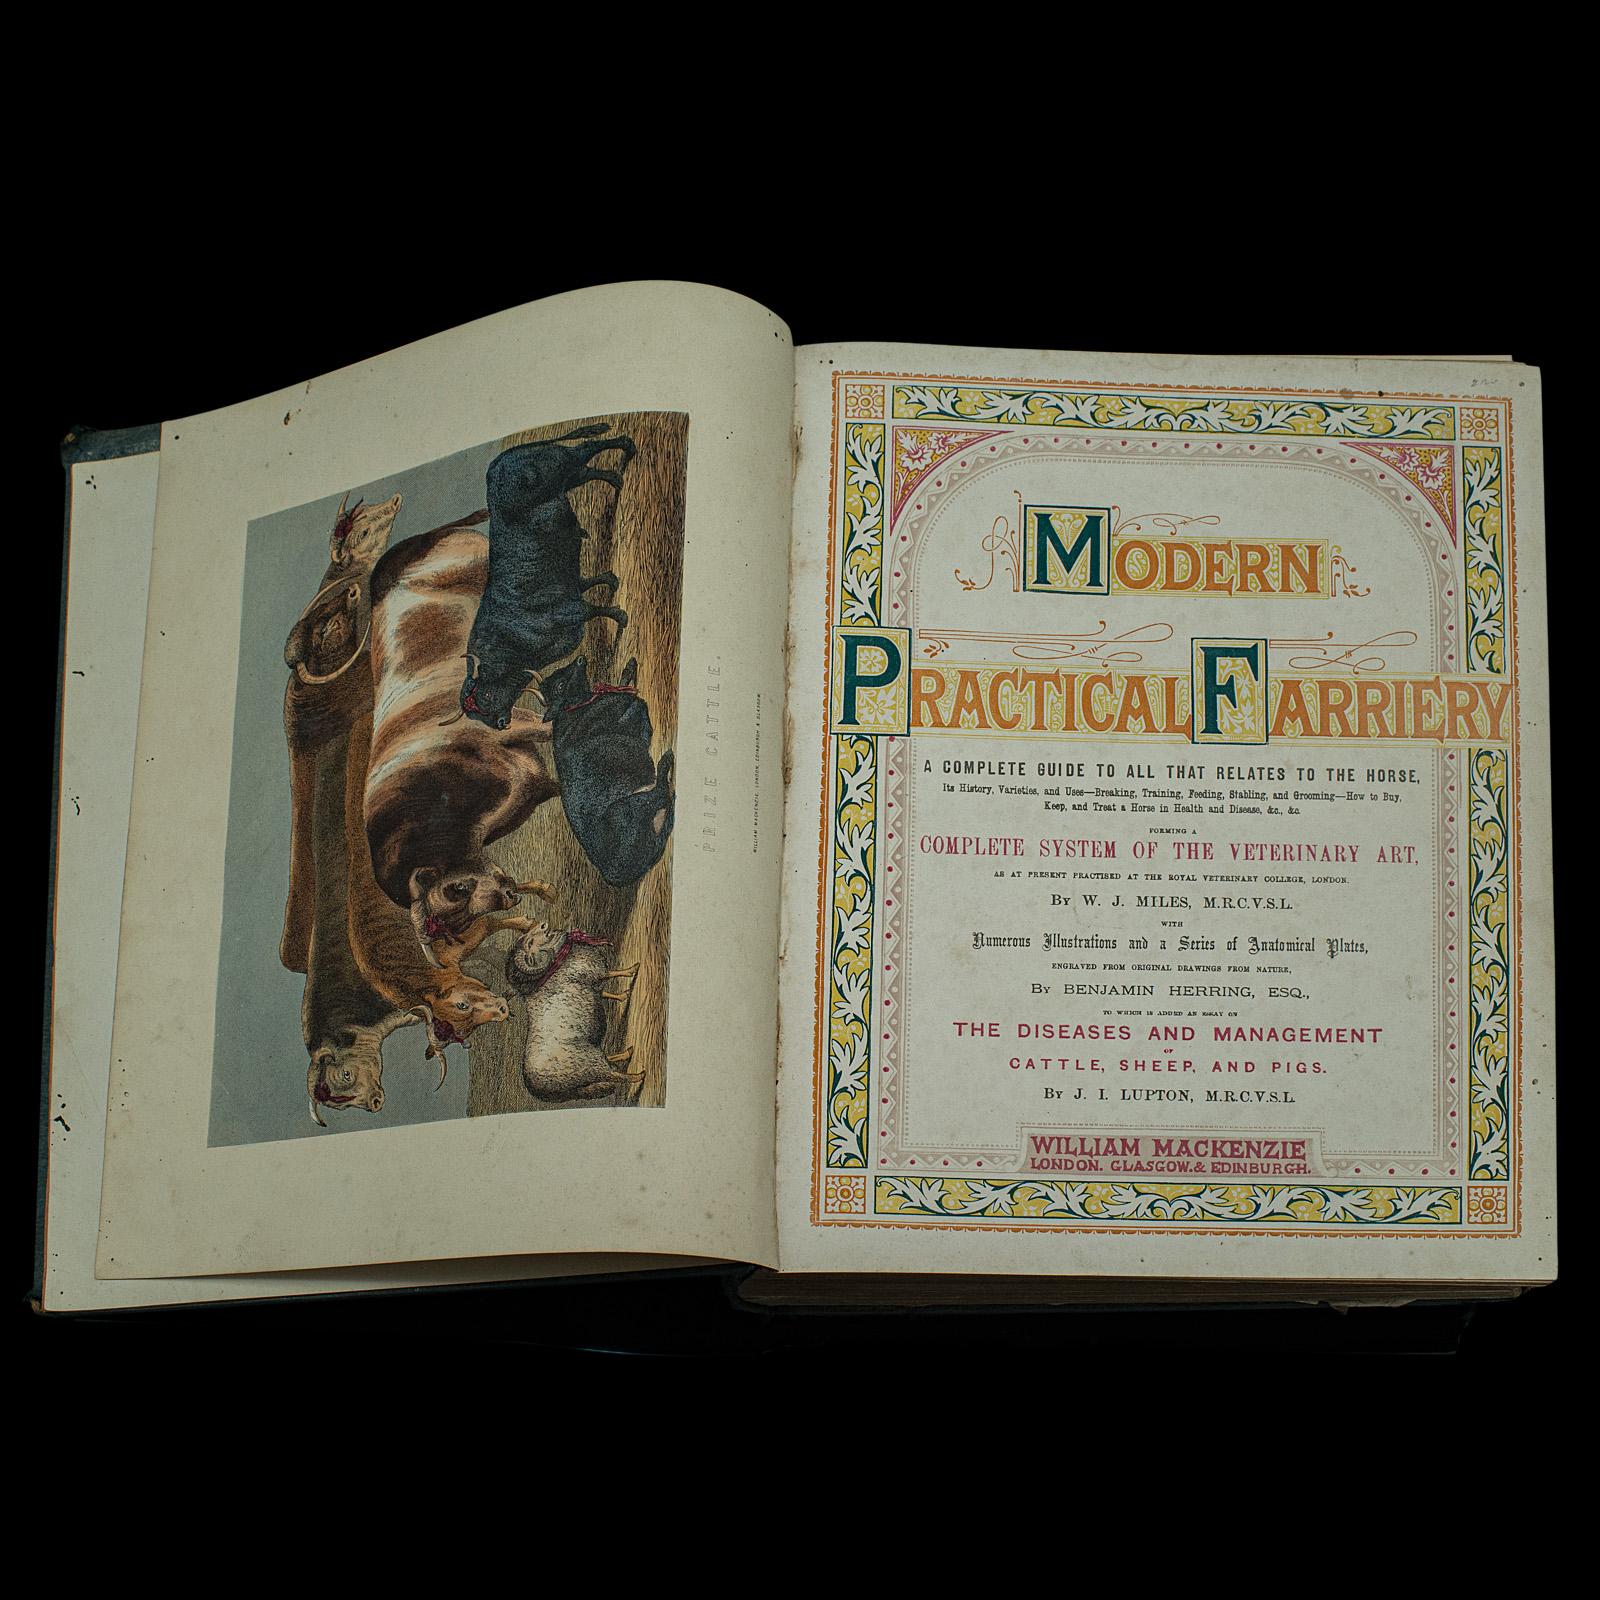 British Large Antique Book, Modern Practical Farriery, WJ Miles, English, Circa 1900 For Sale